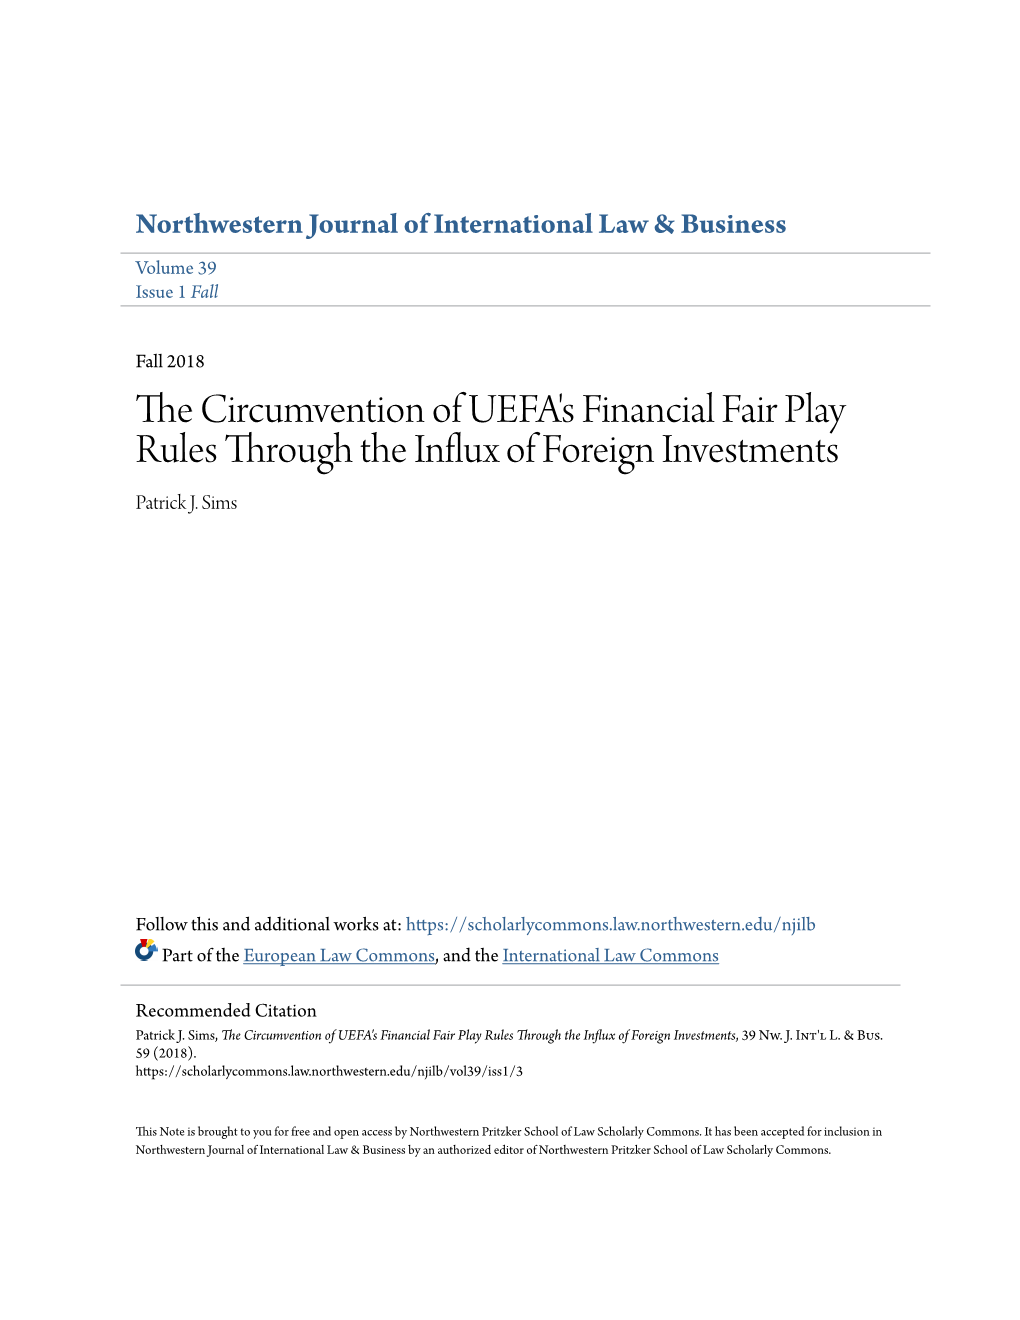 The Circumvention of UEFA's Financial Fair Play Rules Through the Influx of Foreign Investments, 39 Nw